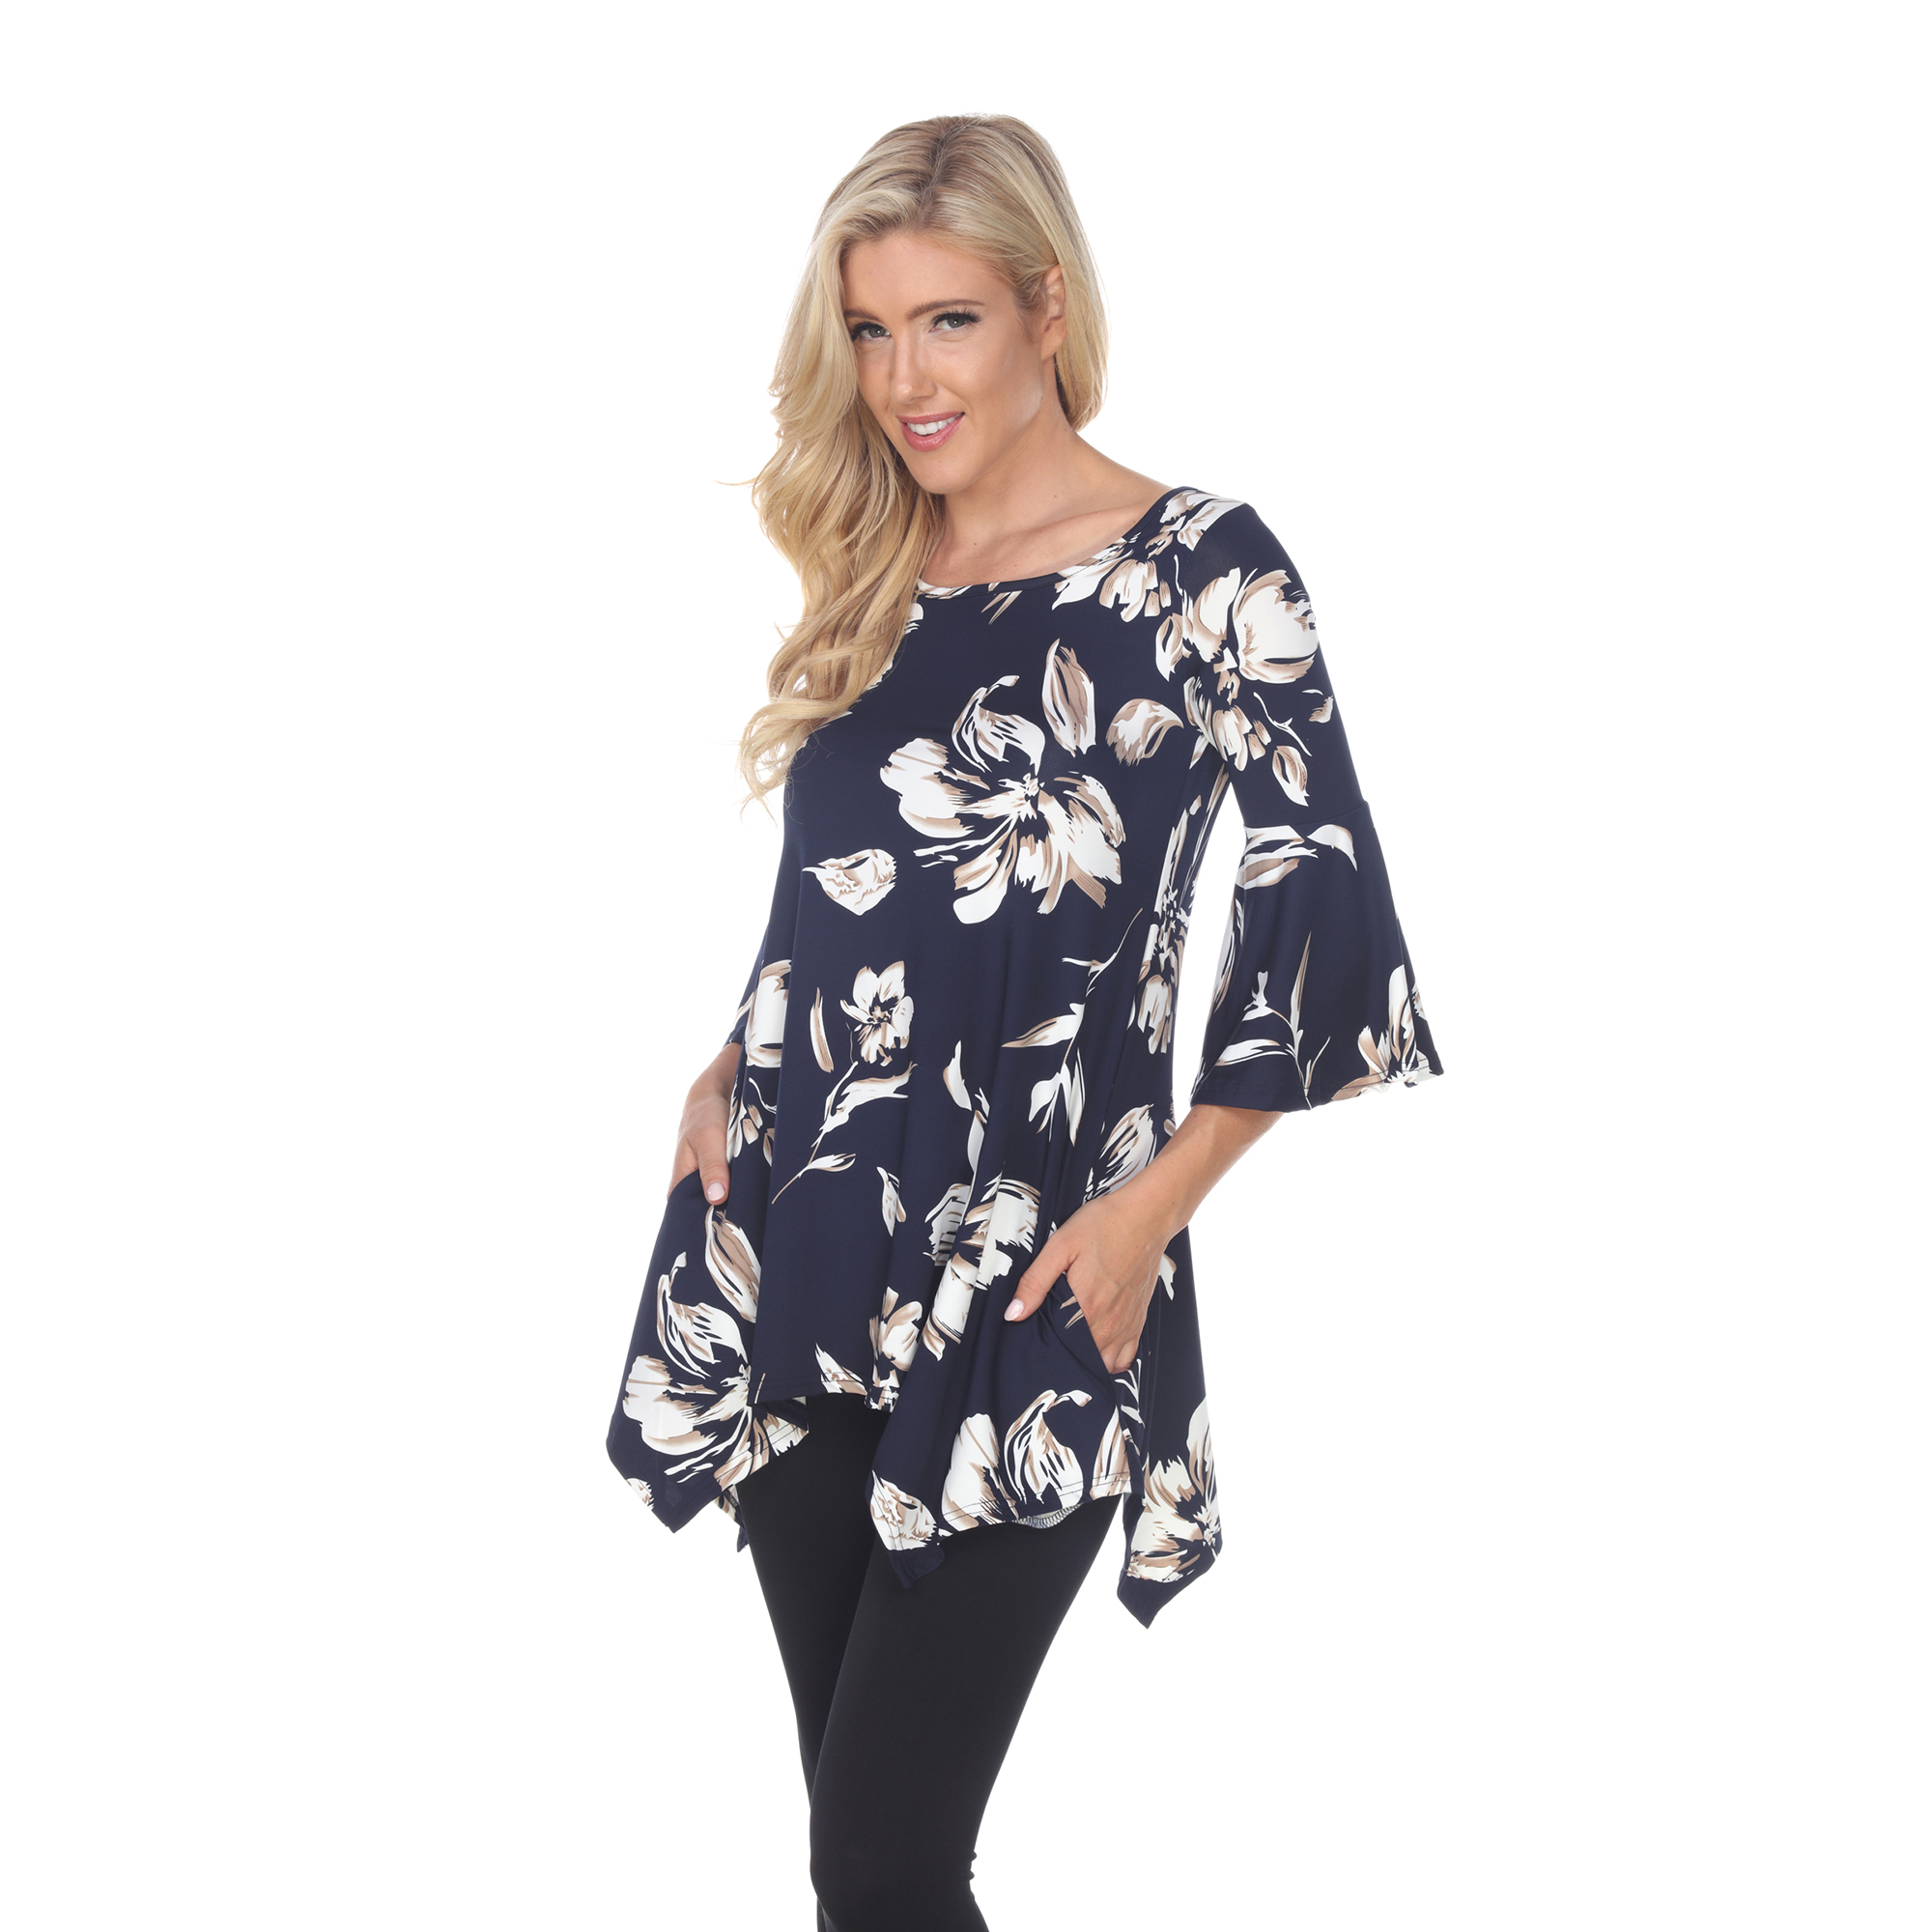 White Mark Women's Floral Print Quarter Sleeve Tunic Top With Pockets - Navy, 1X